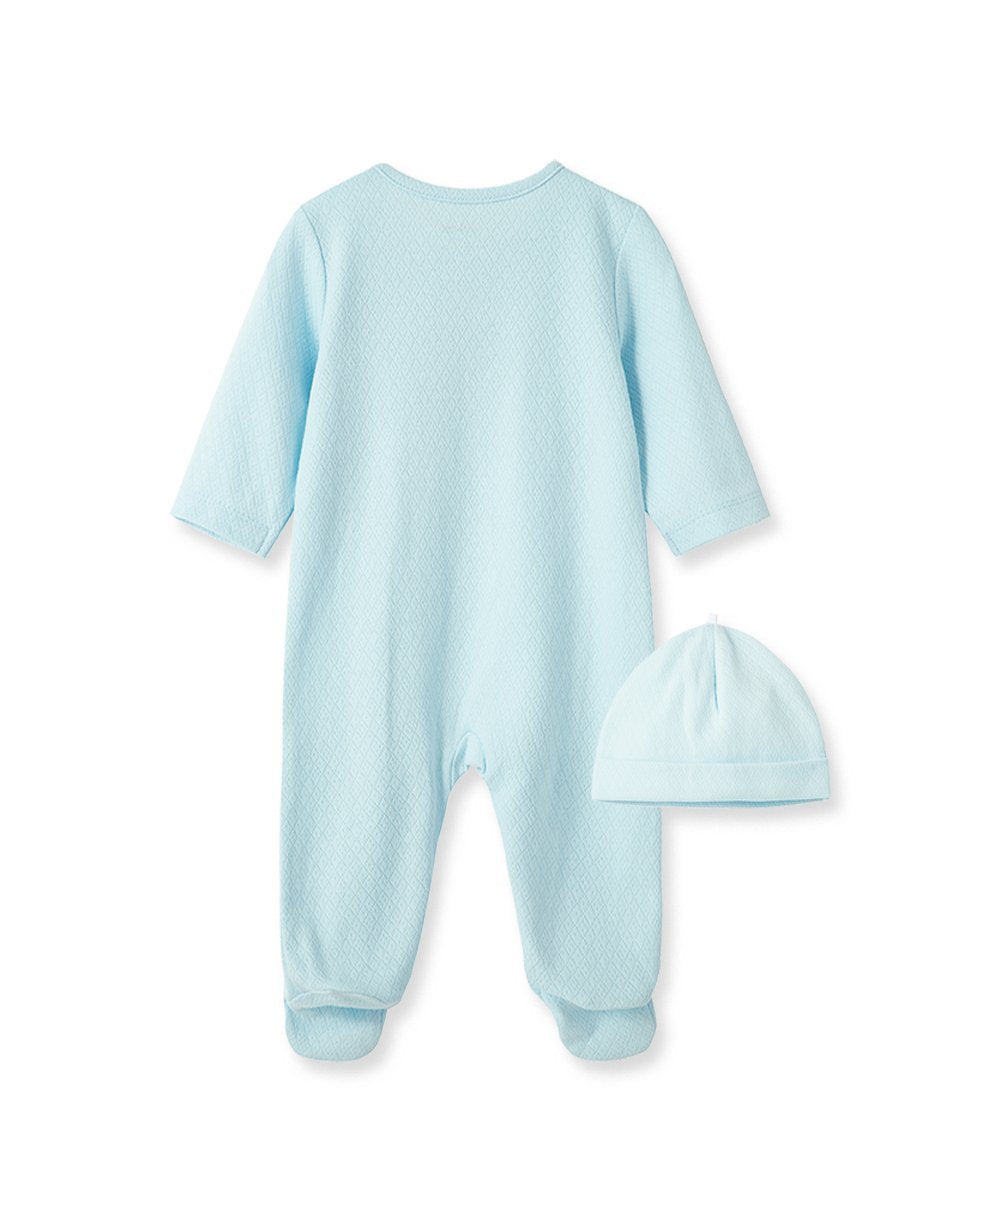 "Welcome to the World" Blue Footie Set